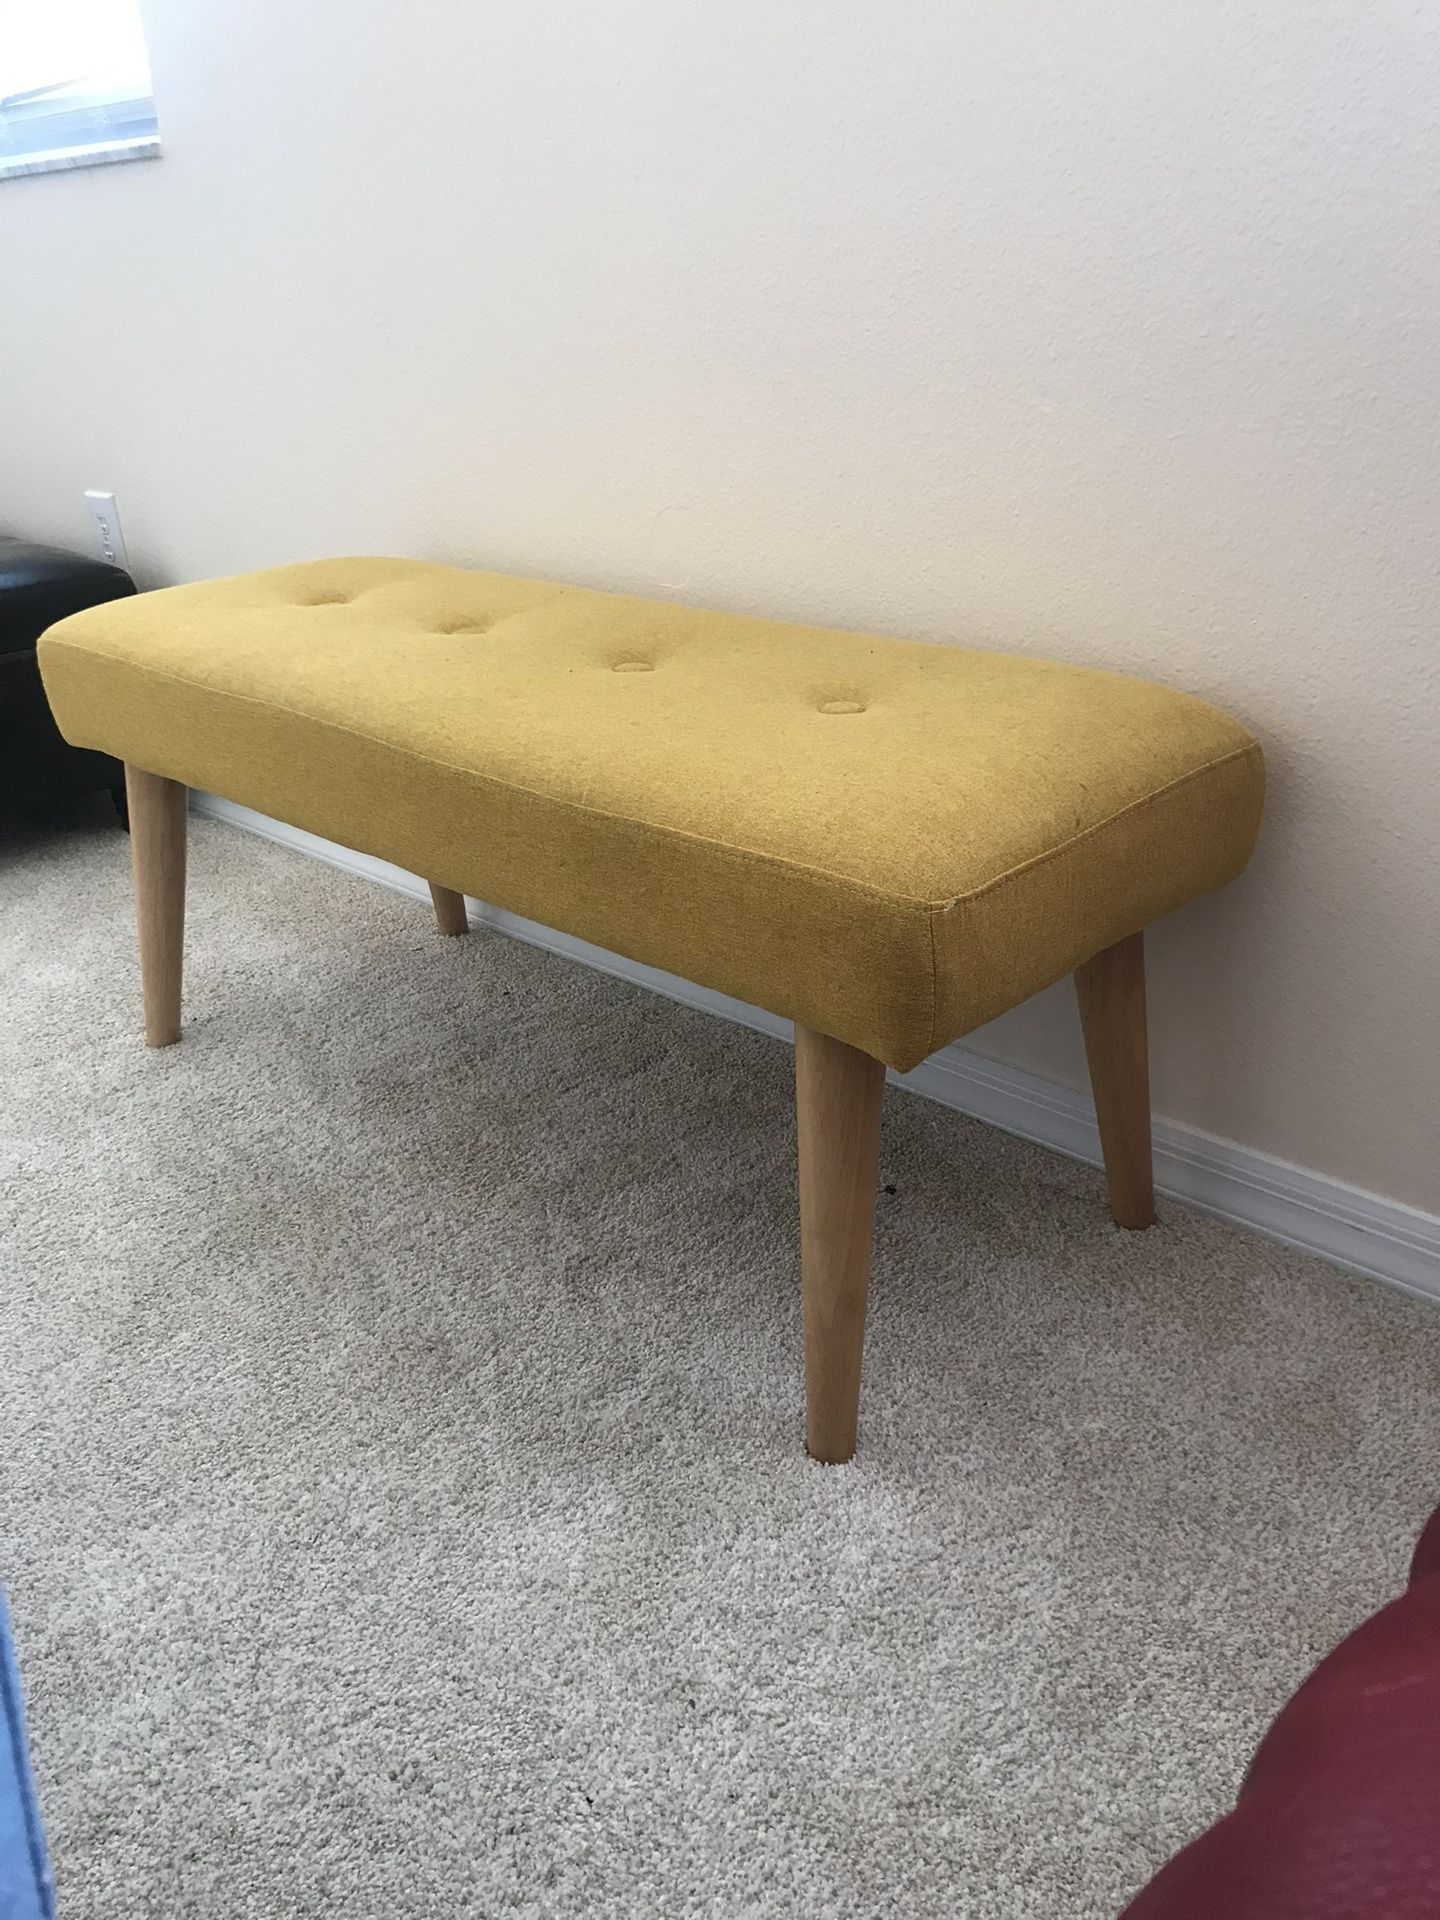 Beautiful Mid Century Modern Yellow Bench In Excellent Condition FREE Local Same Day Delivery 🚚 